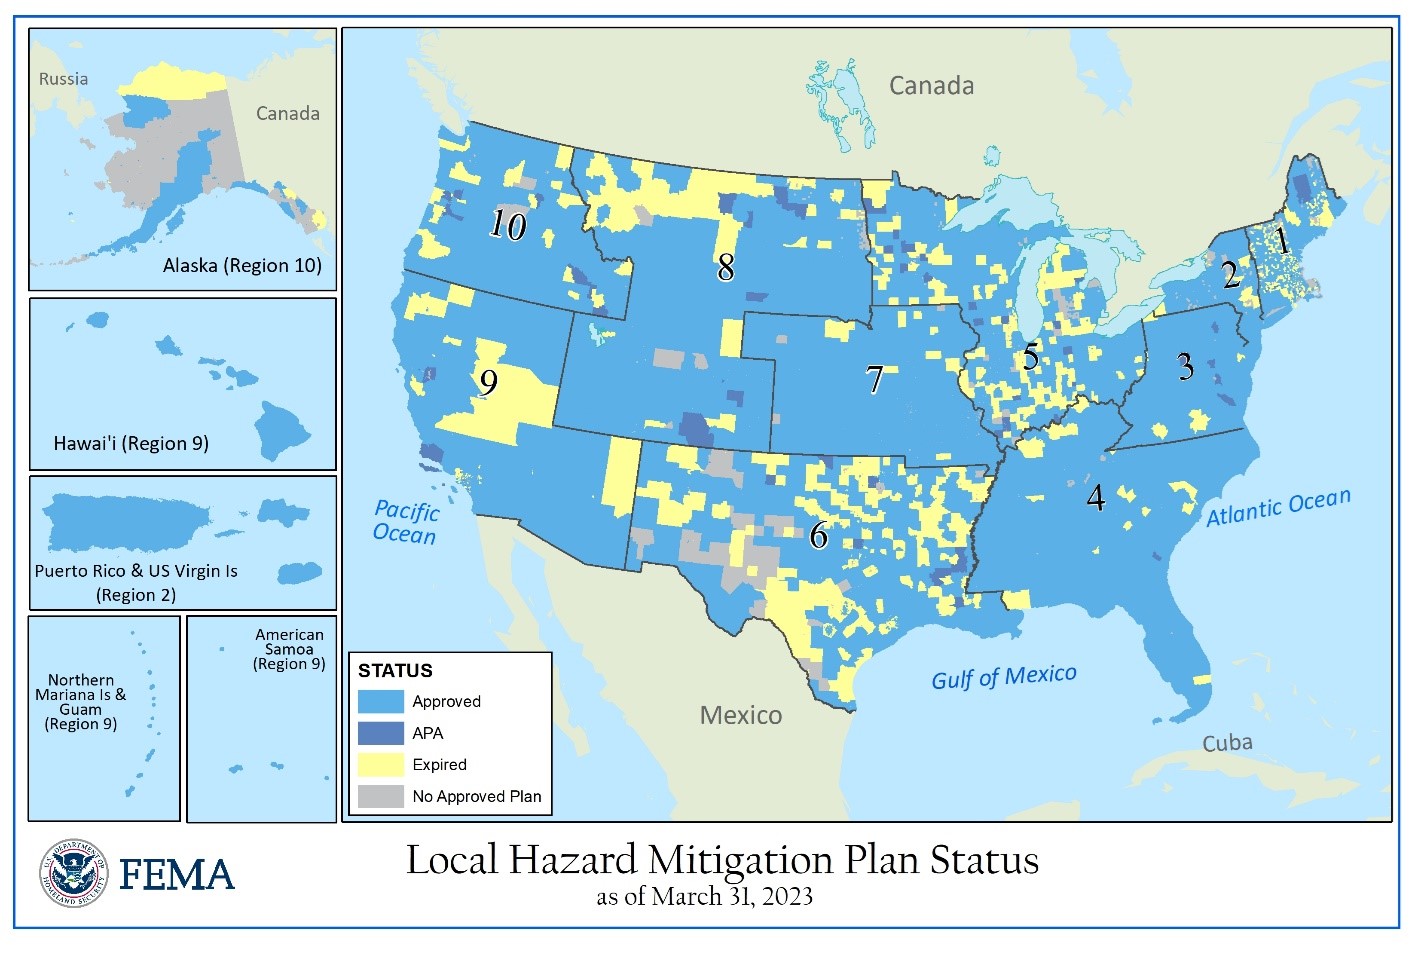 Local Hazard Mitigation Plan Status FY23 Q2 Map (As of March 31, 2023)  The national status map shows local jurisdictions with approved plans (light blue), approvable-pending-adoption (APA) plans (medium dark blue), plans that will expire within 90 days (Dark Blue), and expired plans (yellow).